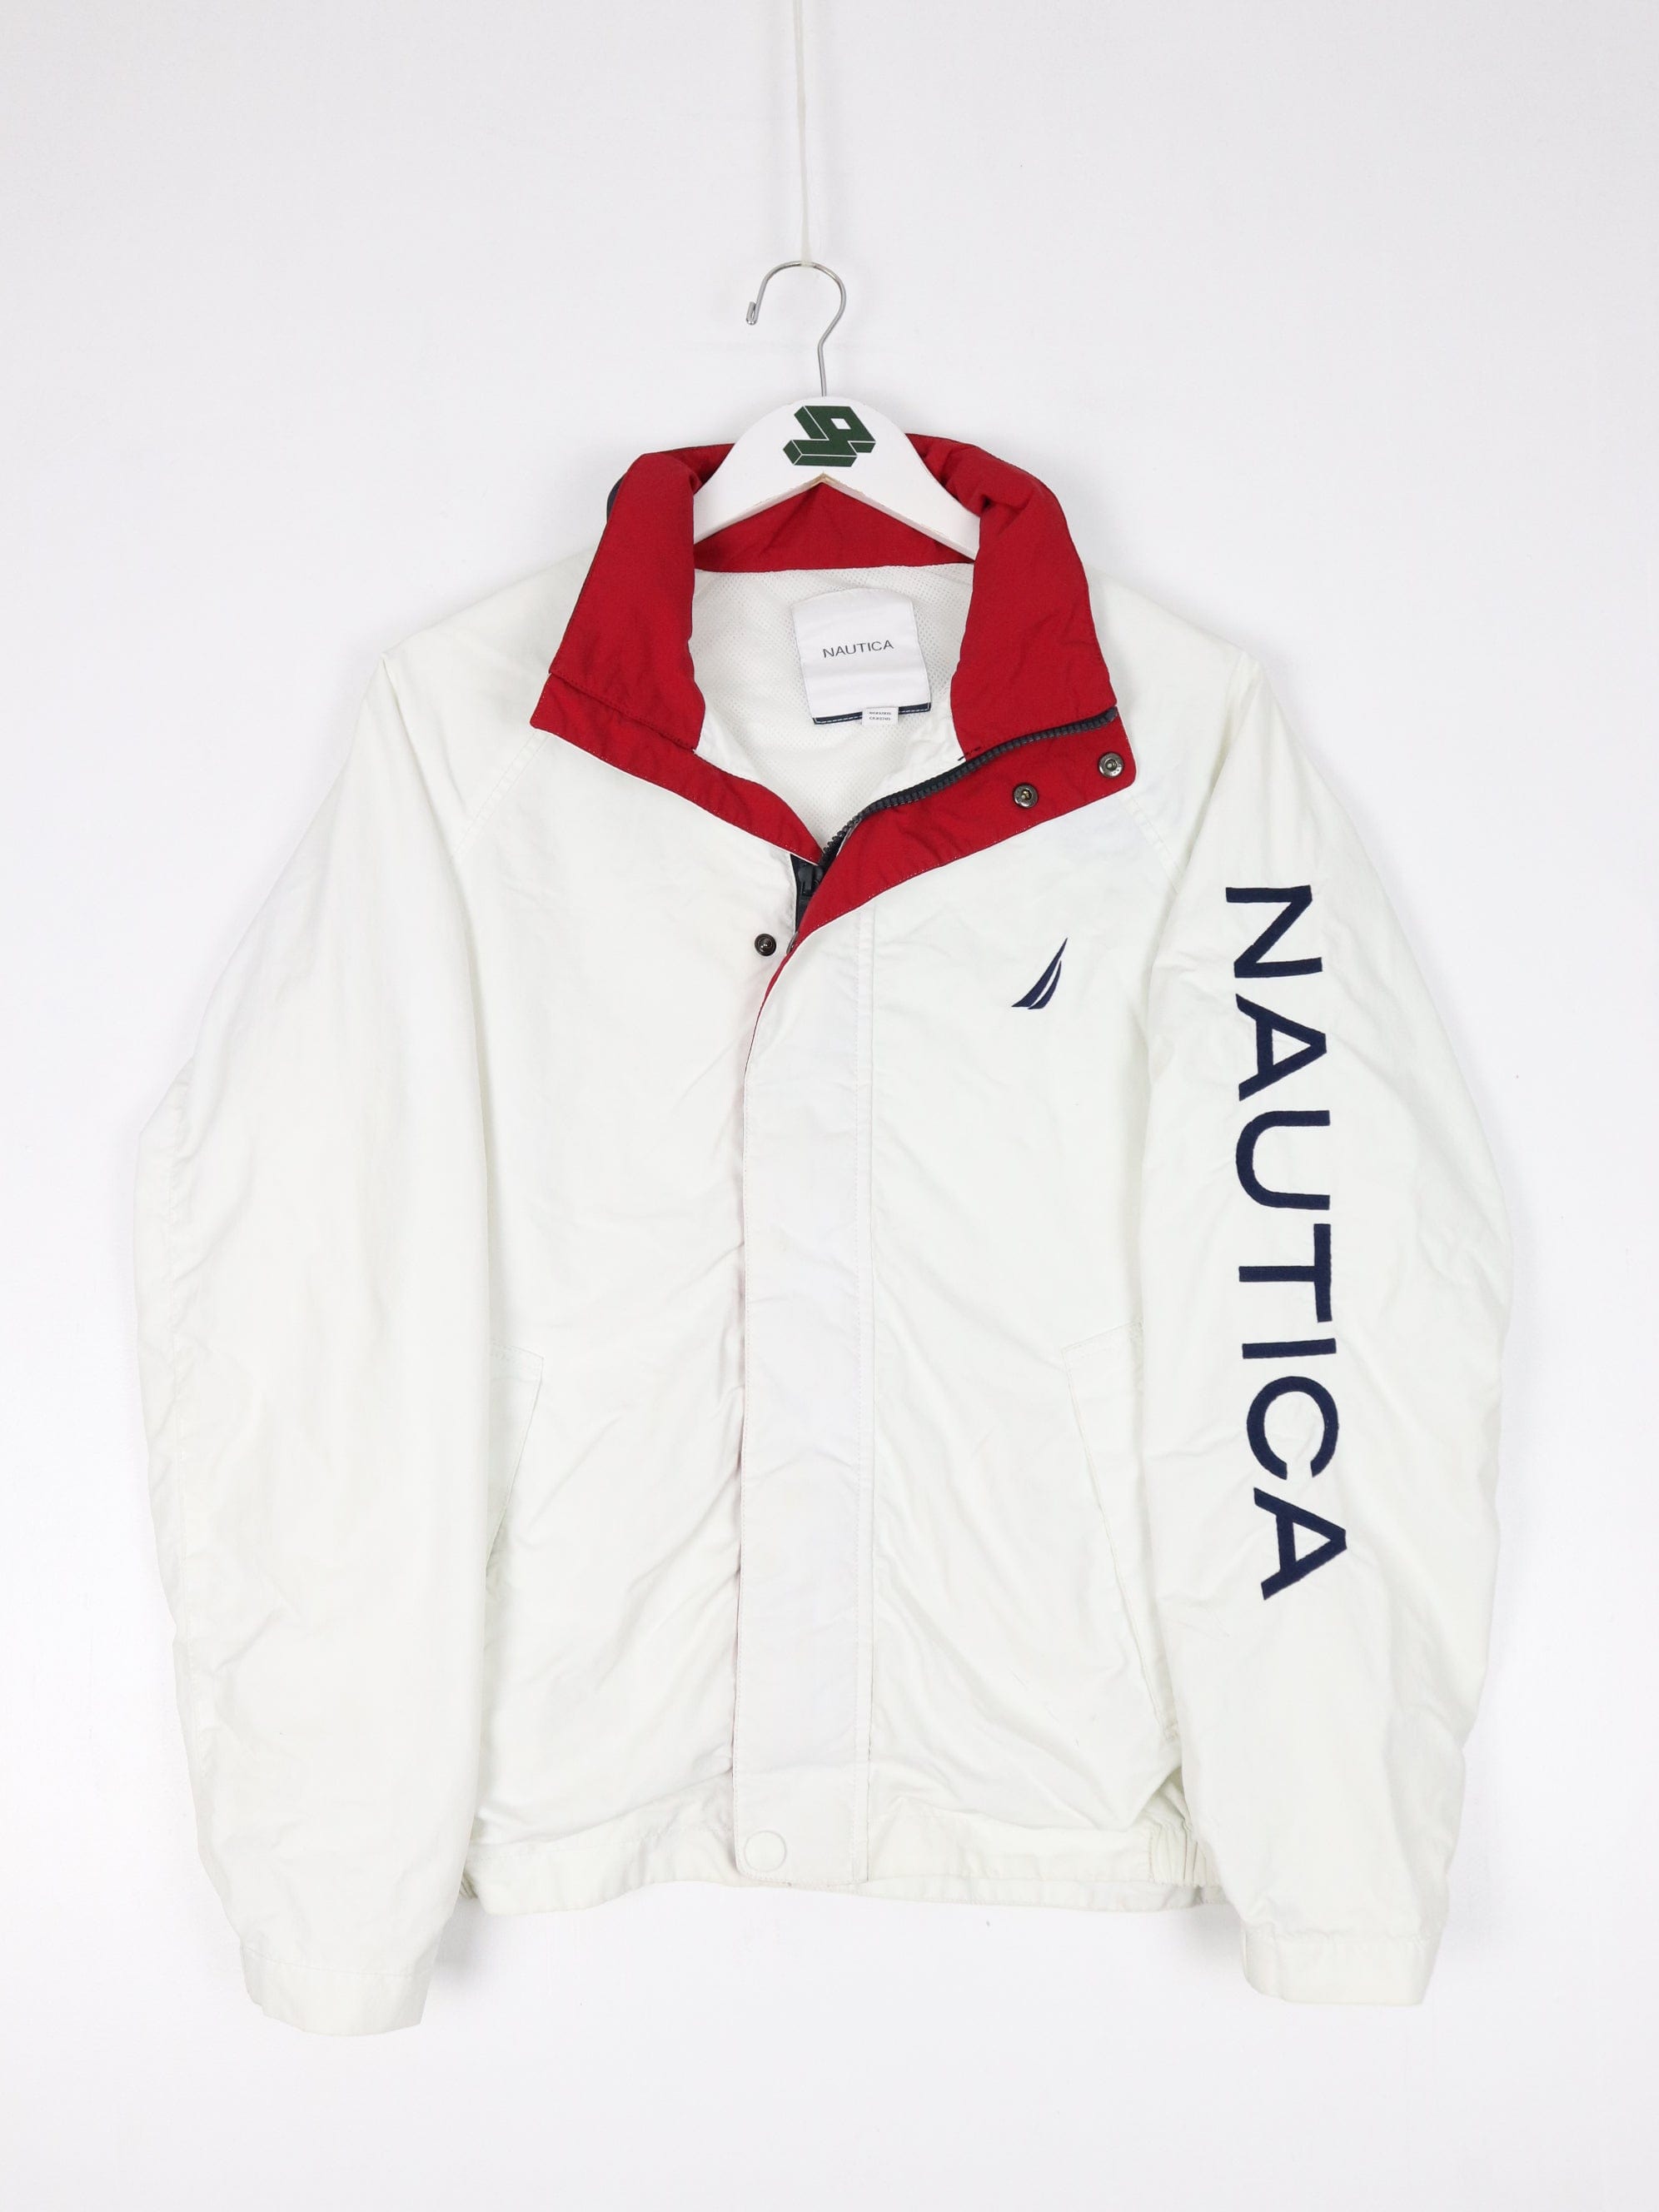 Nautica Jacket Mens XS White Sailing Windbreaker Outdoors Spell Out